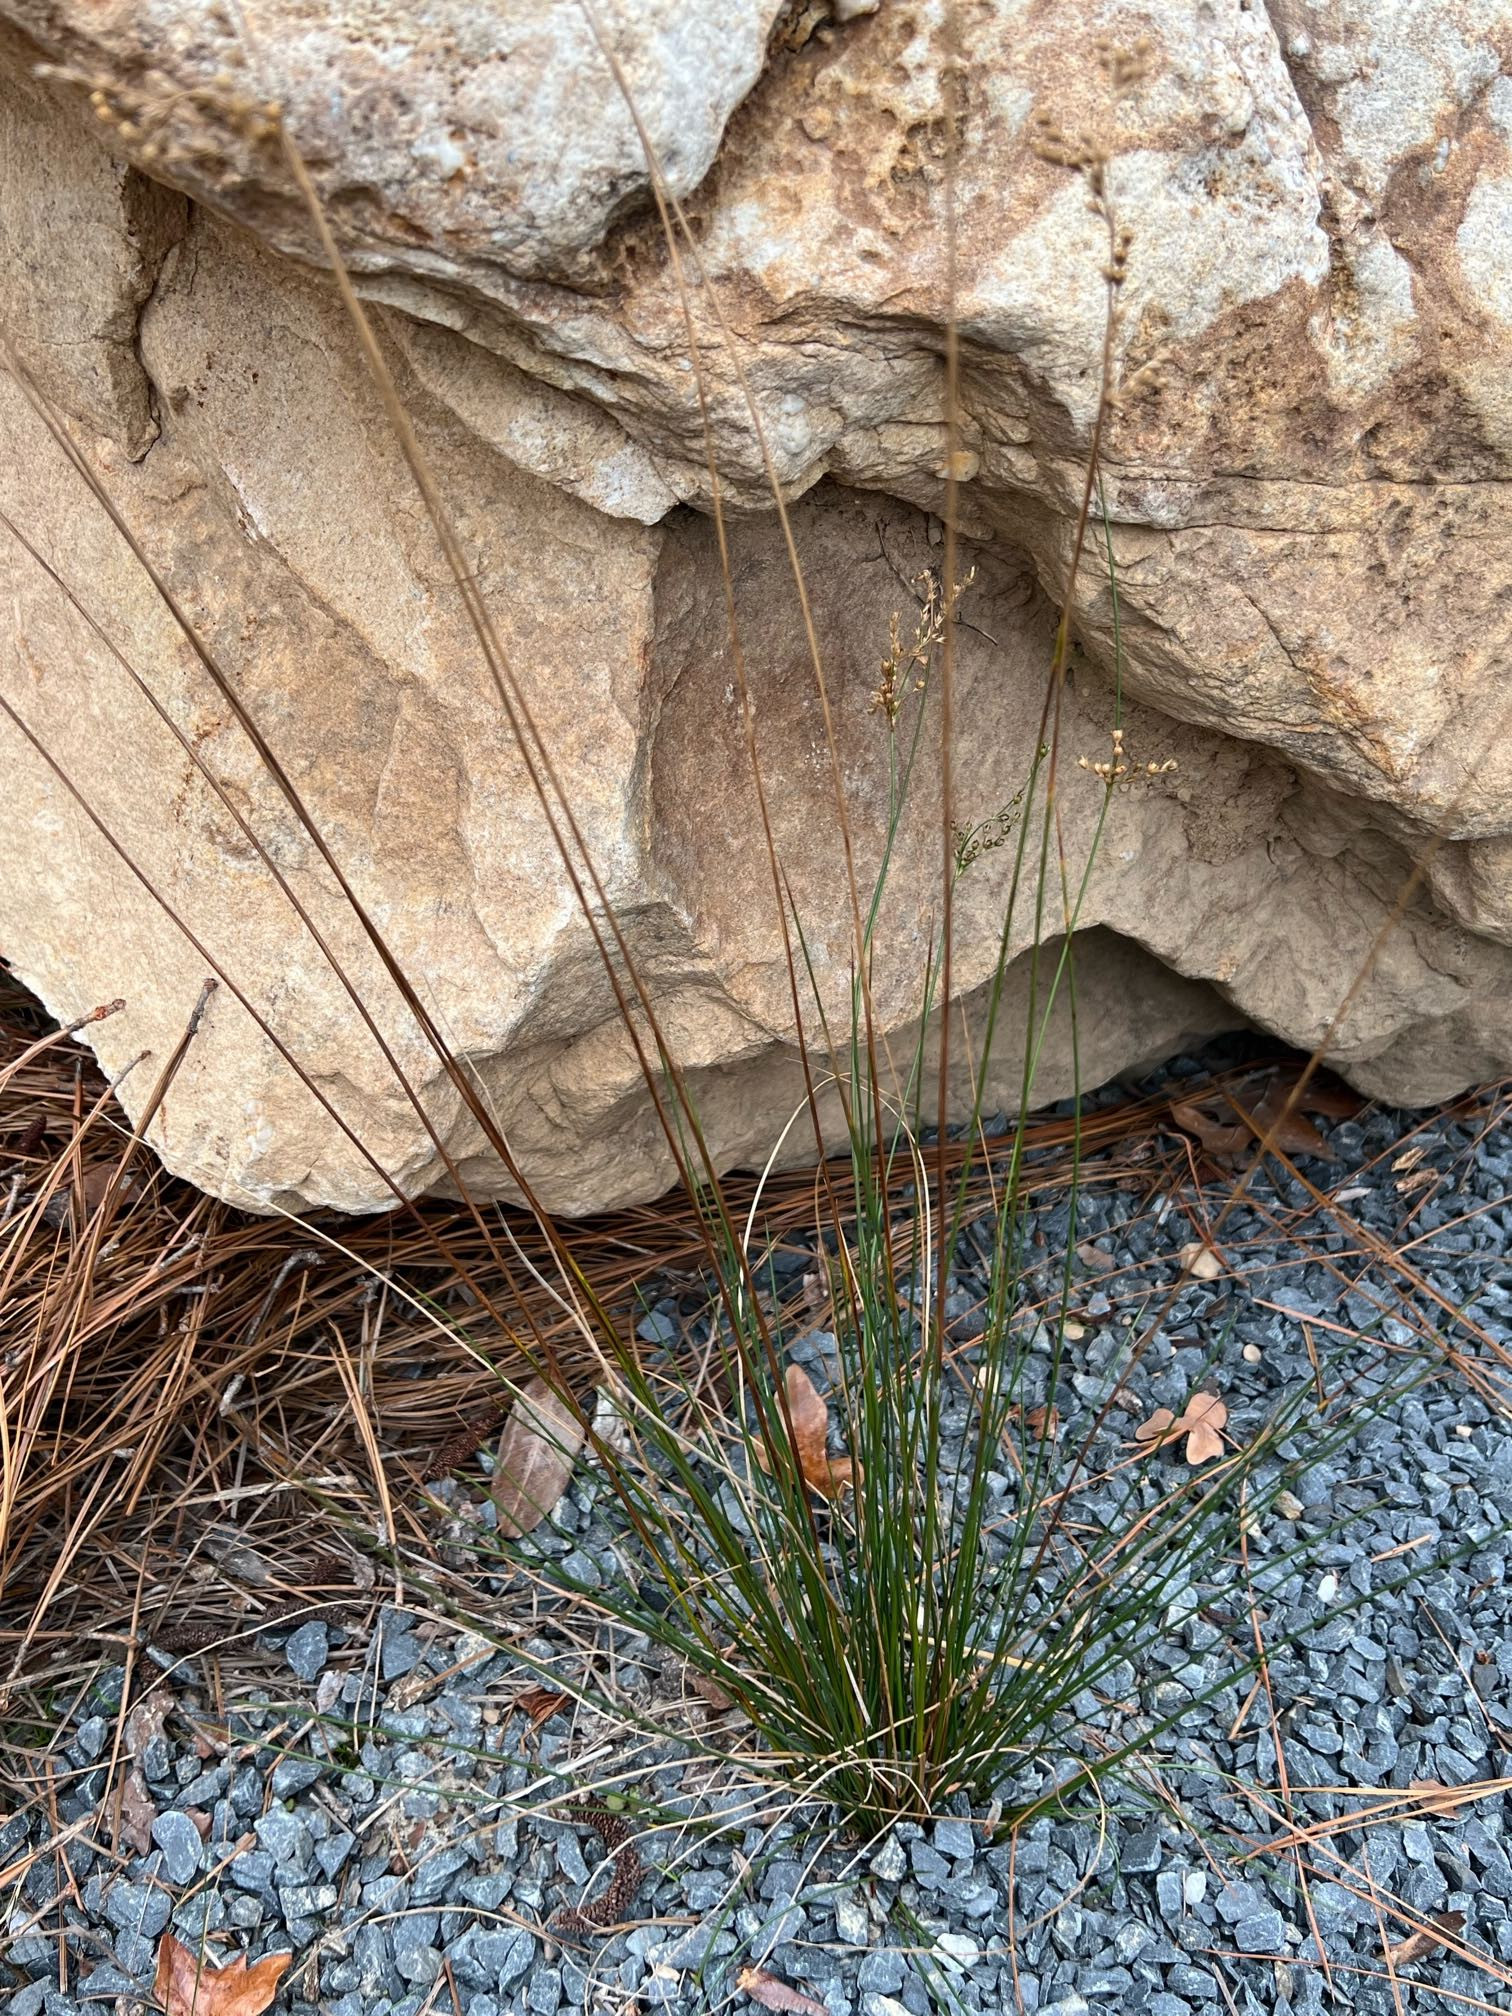 The Scientific Name is Juncus effusus var. solutus. You will likely hear them called Common Rush, Soft Rush. This picture shows the Stems grow 2-4 feet tall and form many-stemmed tussocks. of Juncus effusus var. solutus